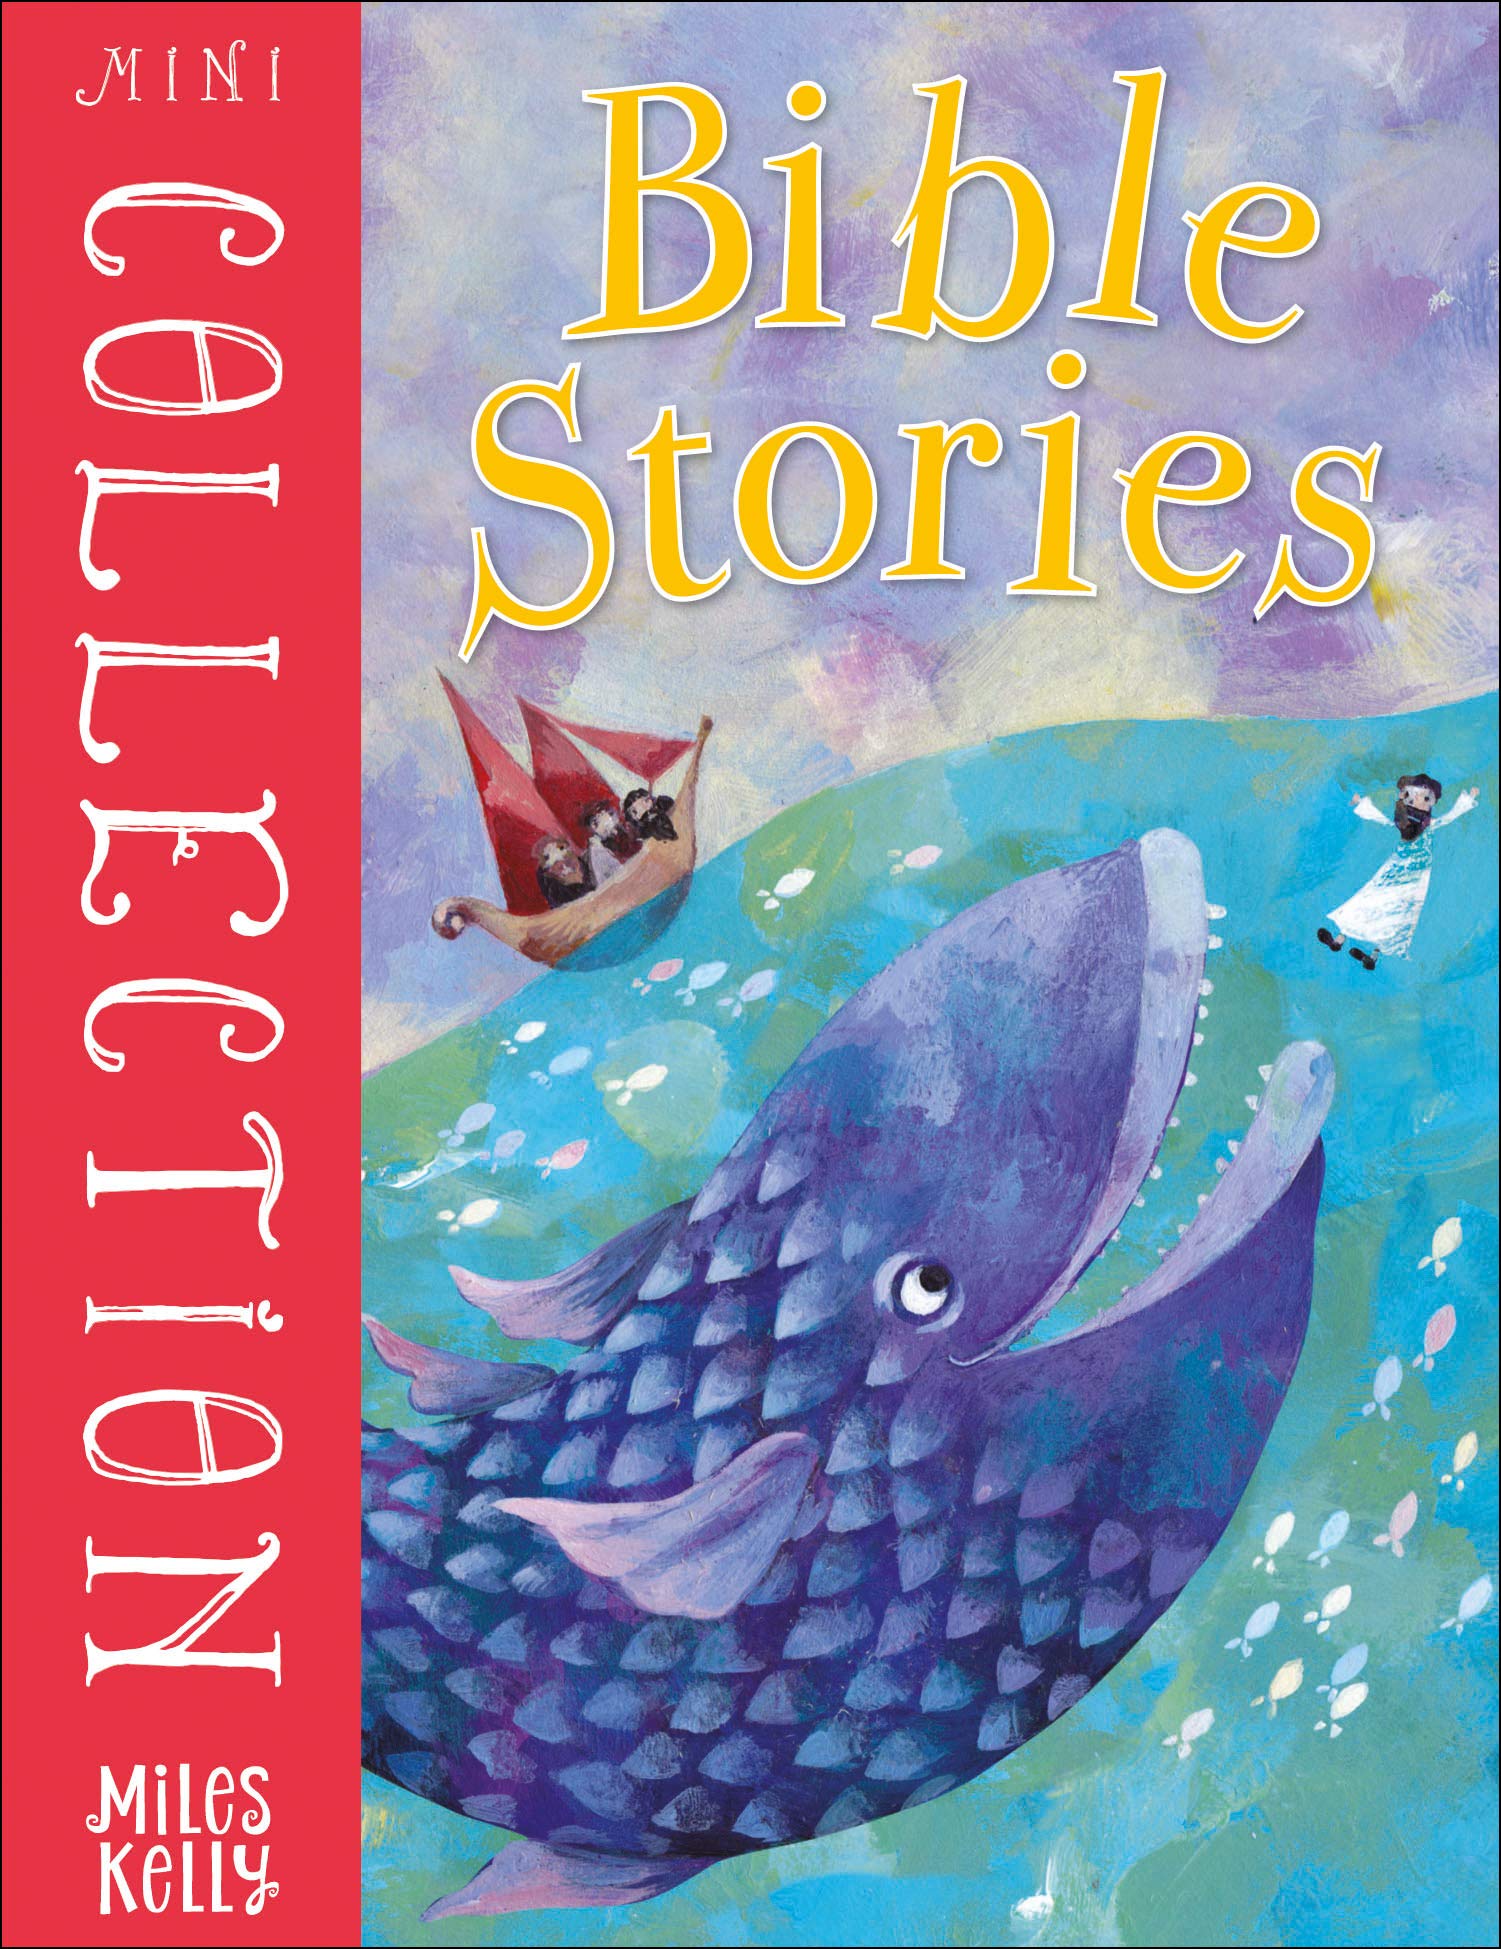 MINI COLLECTION BIBLE STORIES